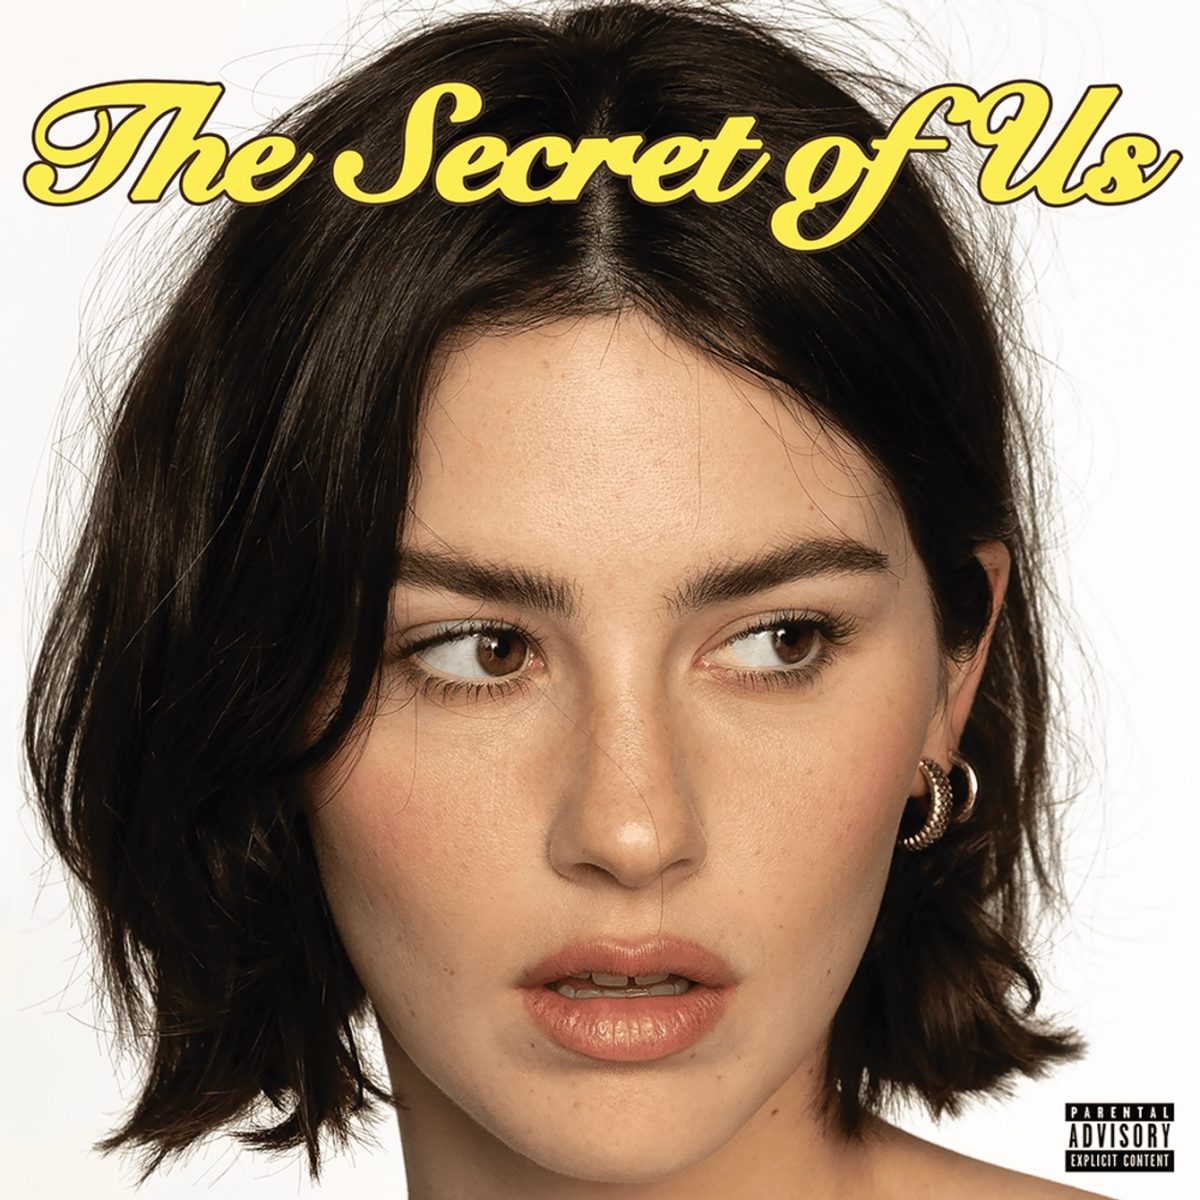 Cover+of+Gracie+Abrams+new+album+cover+The+Secret+of+Us+announced+to+release+June+21.